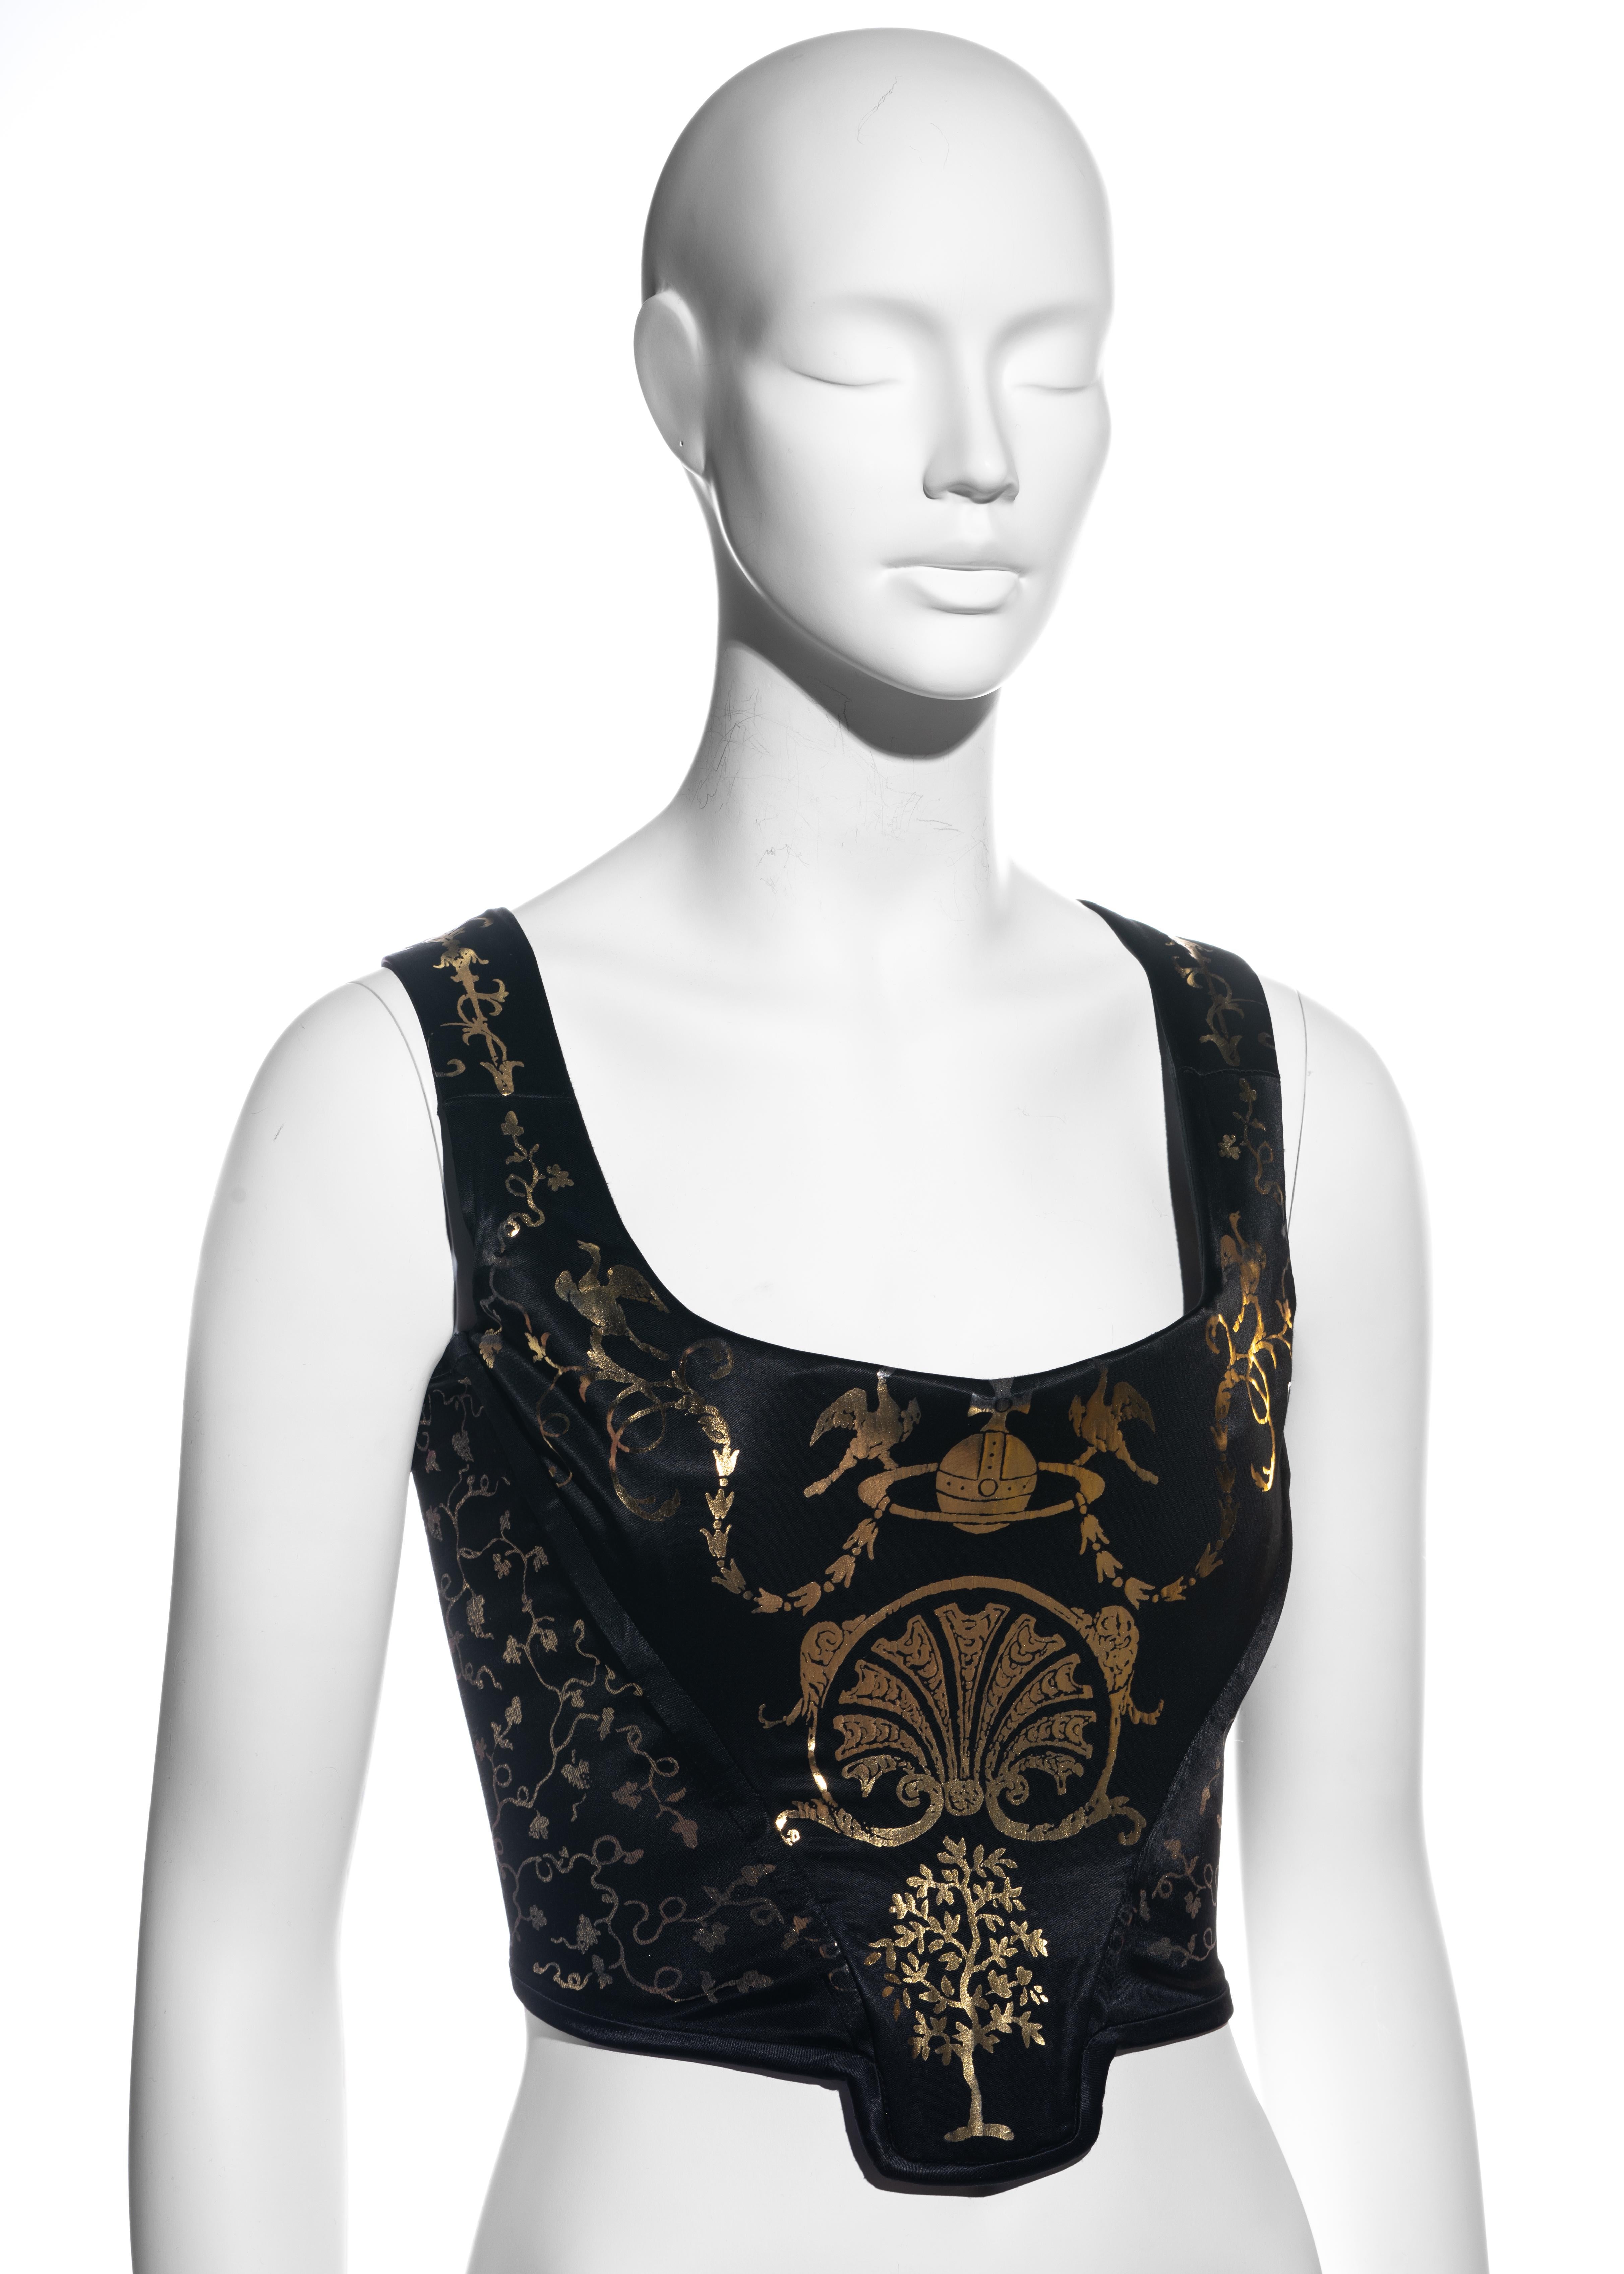 ▪ Vivienne Westwood black satin corset top
▪ Metallic gold classical figures and motifs inspired by furniture jeweler, André-Charles Boulle
▪ Internal boning; designed to cinch the waist and push the breasts up 
▪ Back zip fastening 
▪ FR 42 - UK 14